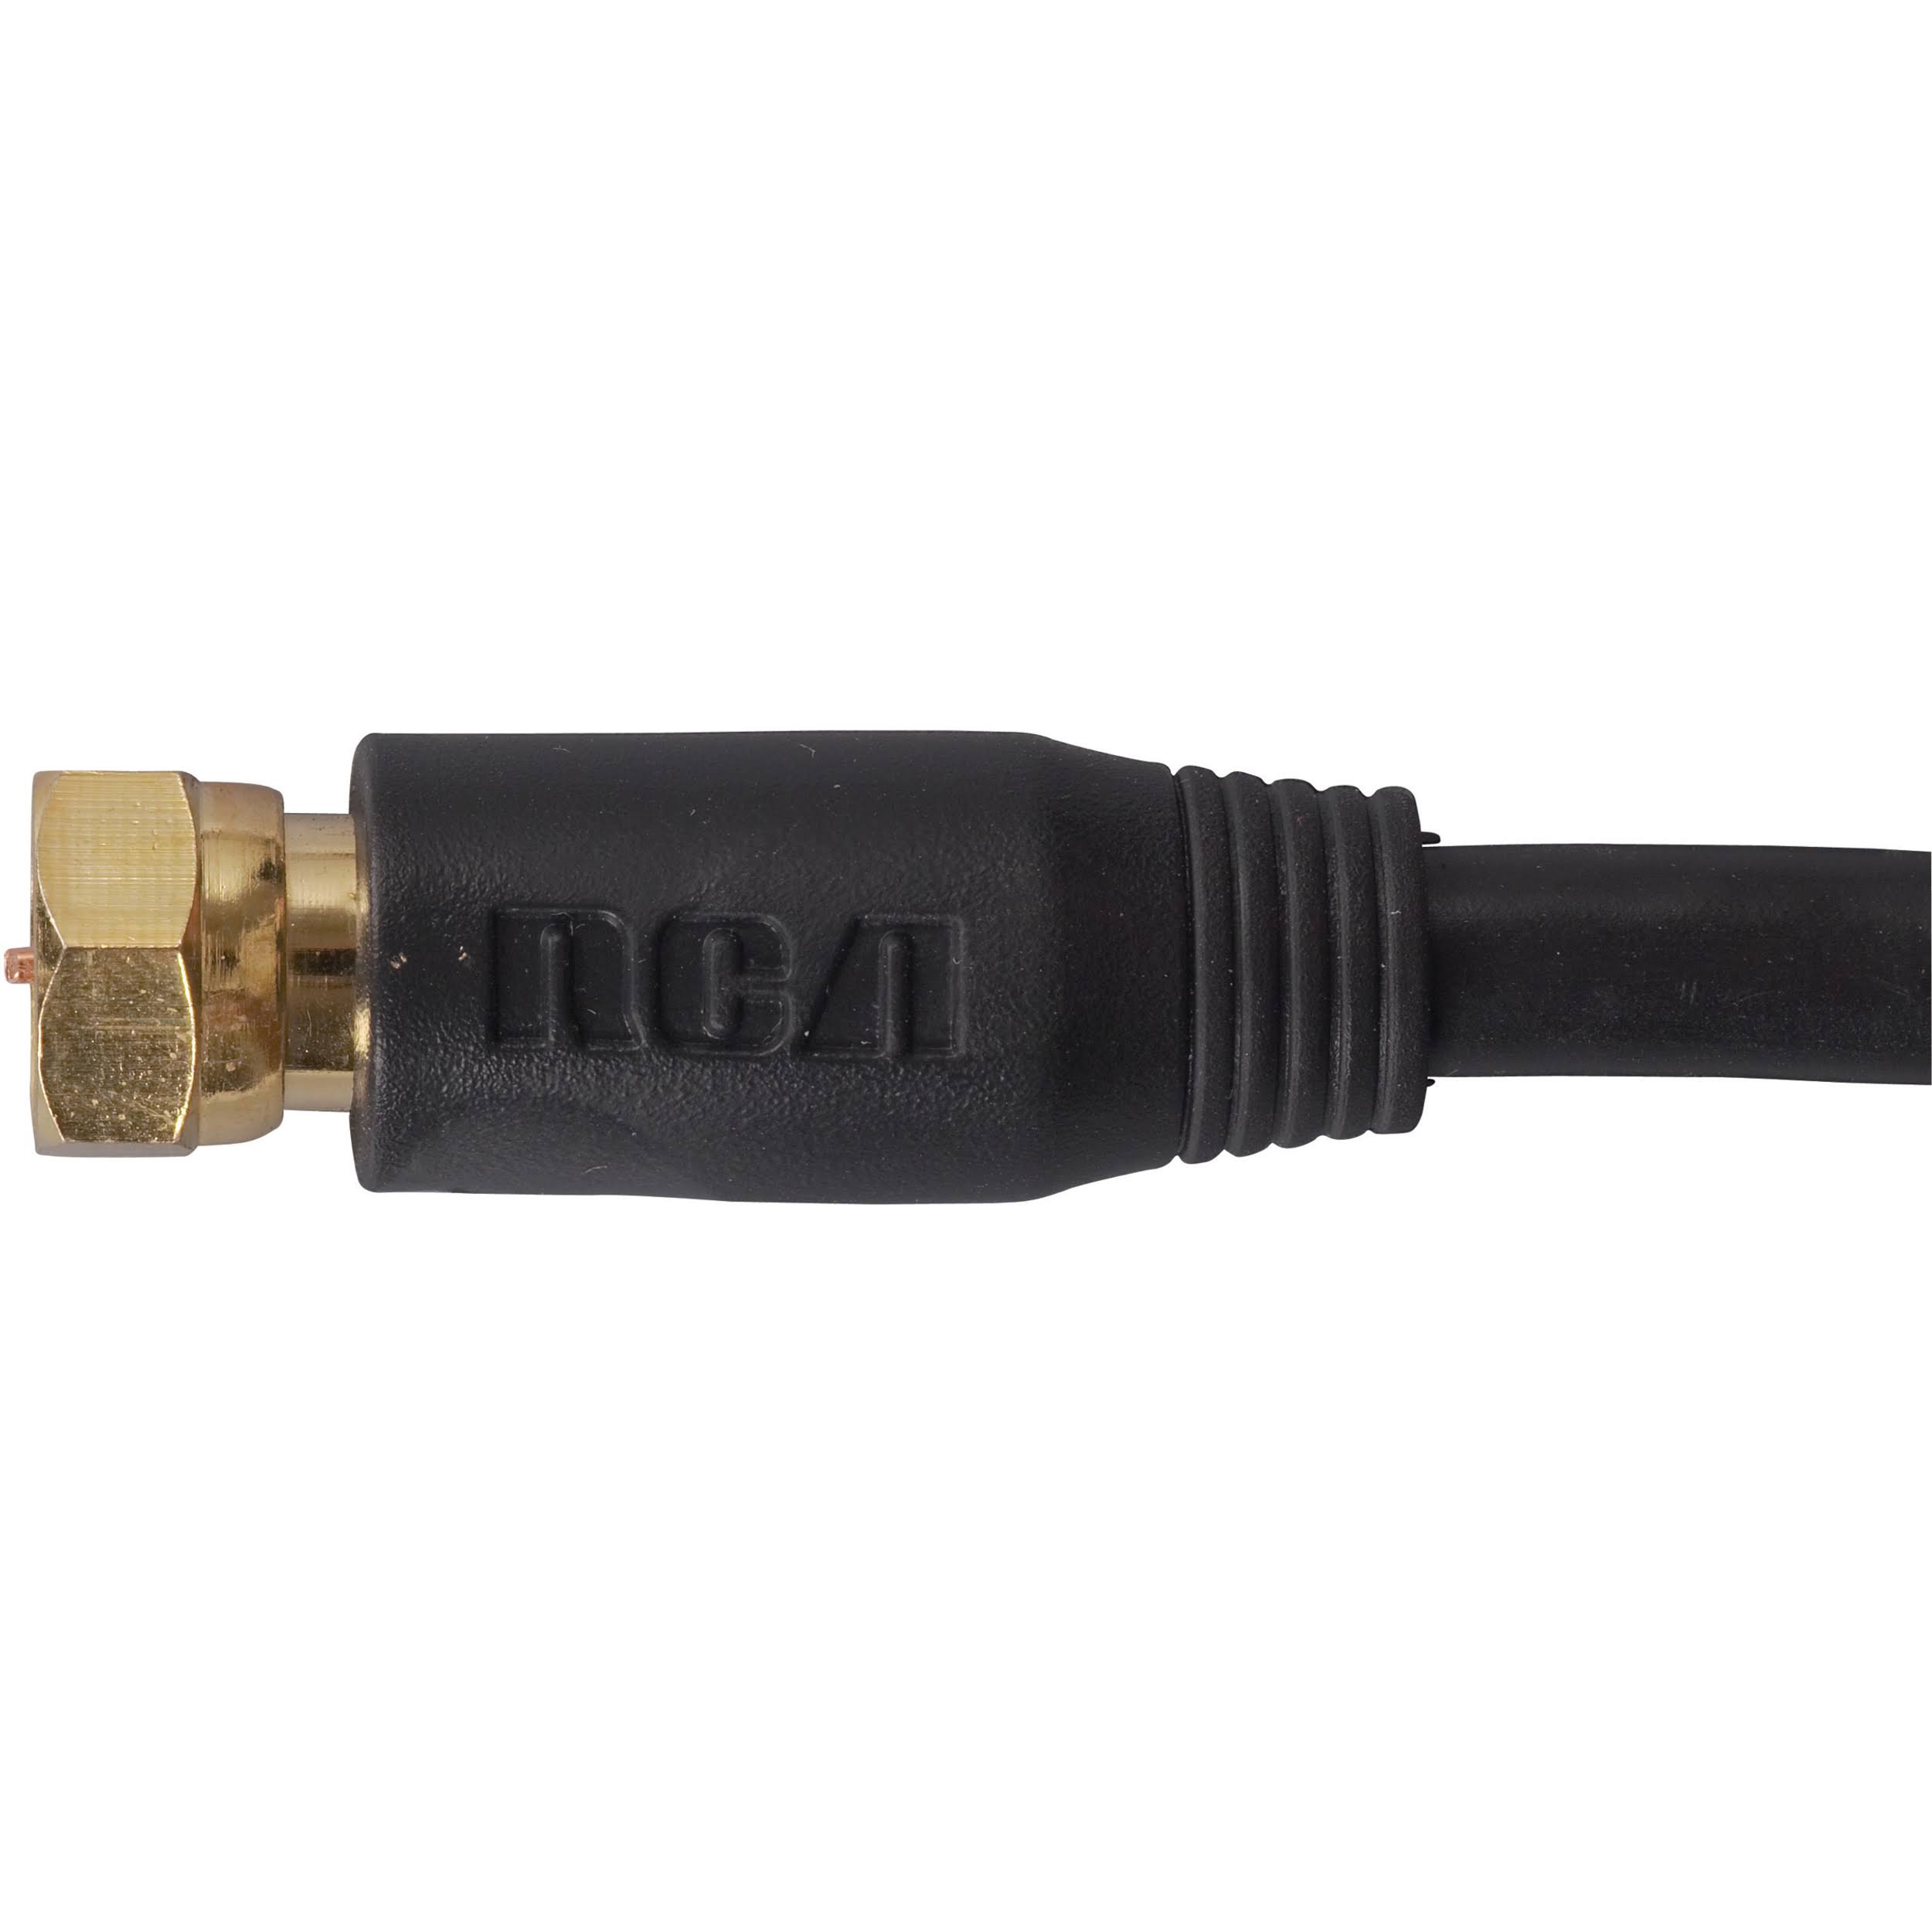 RCA Coaxial Cable with Rg6 Connectors - Black, 50'